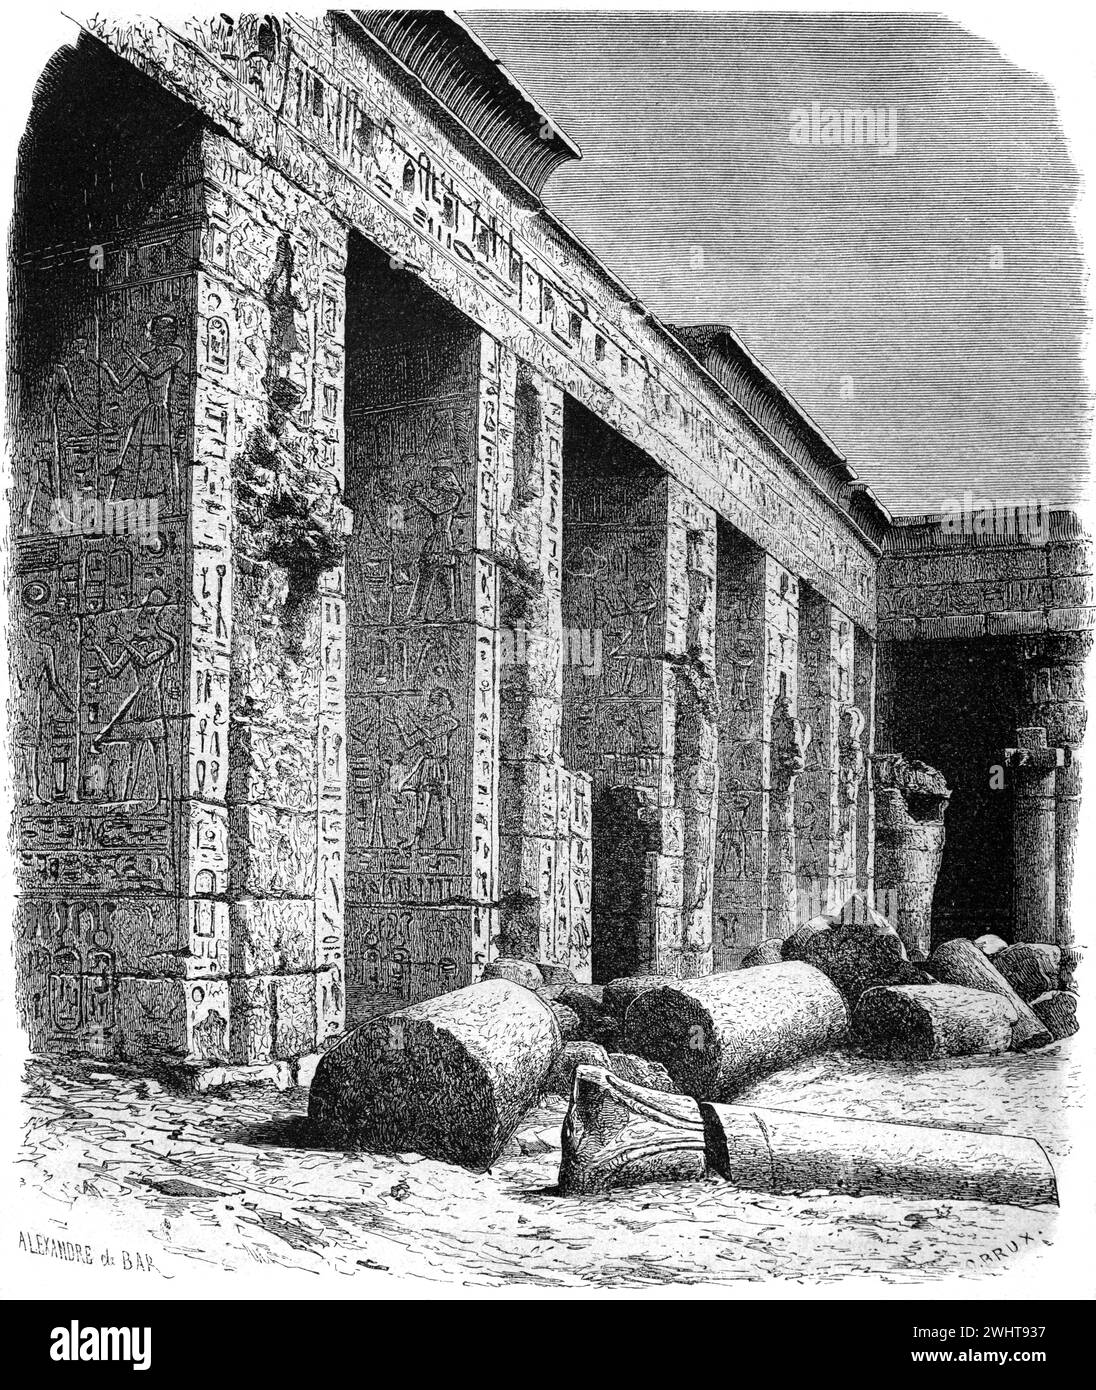 Interior Courtyard with Massive Stone Columns of Medinet Habu, Mortuary Temple of Rameses II (c9th BC) Egypt. Vintage or Historic Engraving or Illustration 1863 Stock Photo